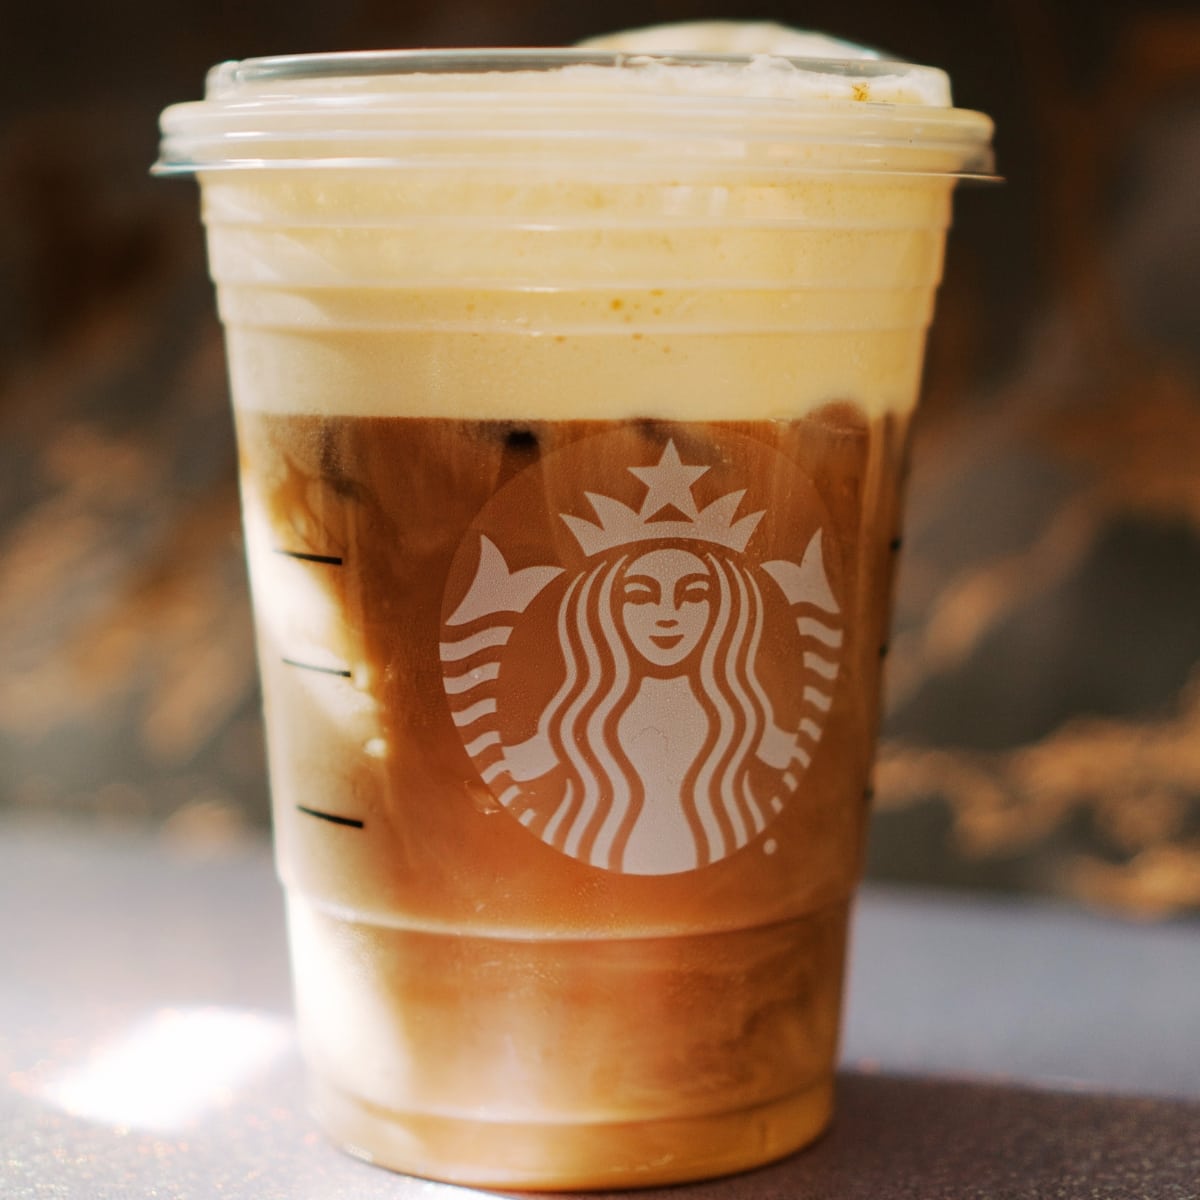 An iced Starbucks drink lit by the afternoon sun.